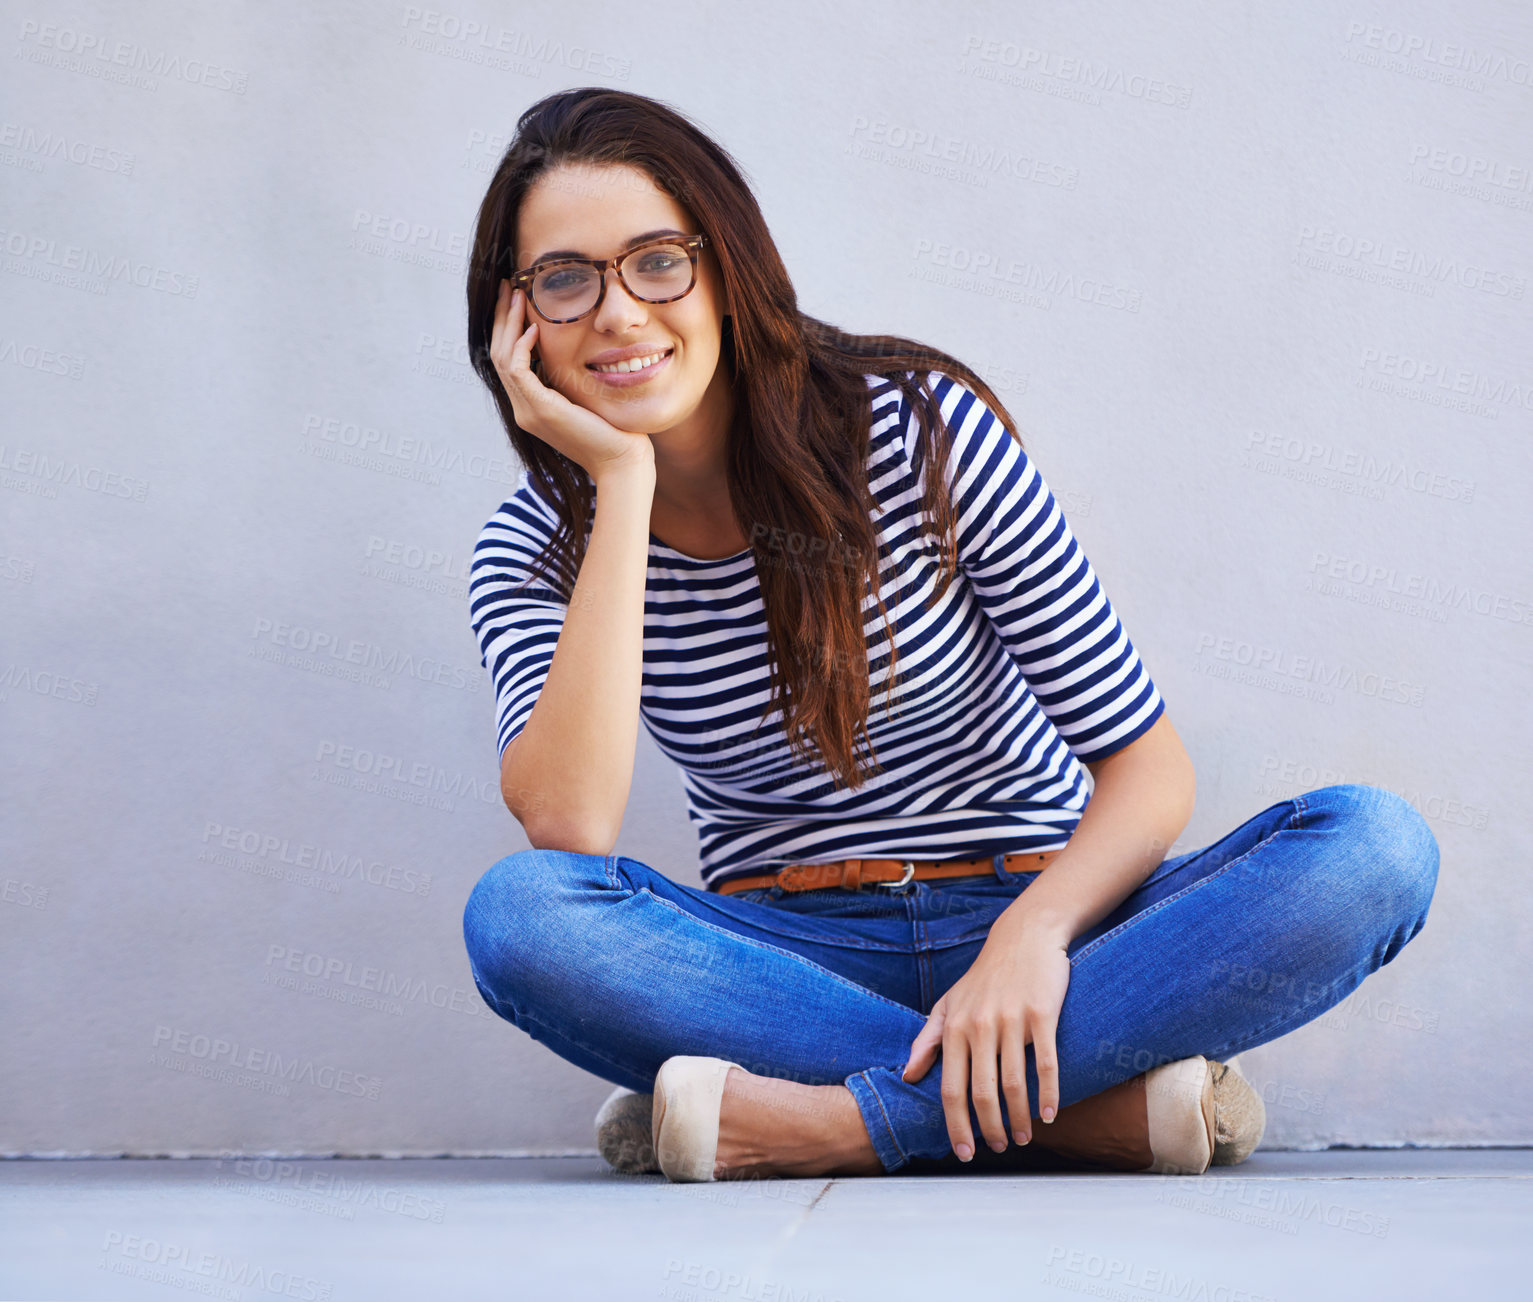 Buy stock photo Happy, fashion and portrait of woman on floor with wall background for casual or trendy style. Smile, model and relax with confident young person legs crossed in glasses for casual clothing outfit